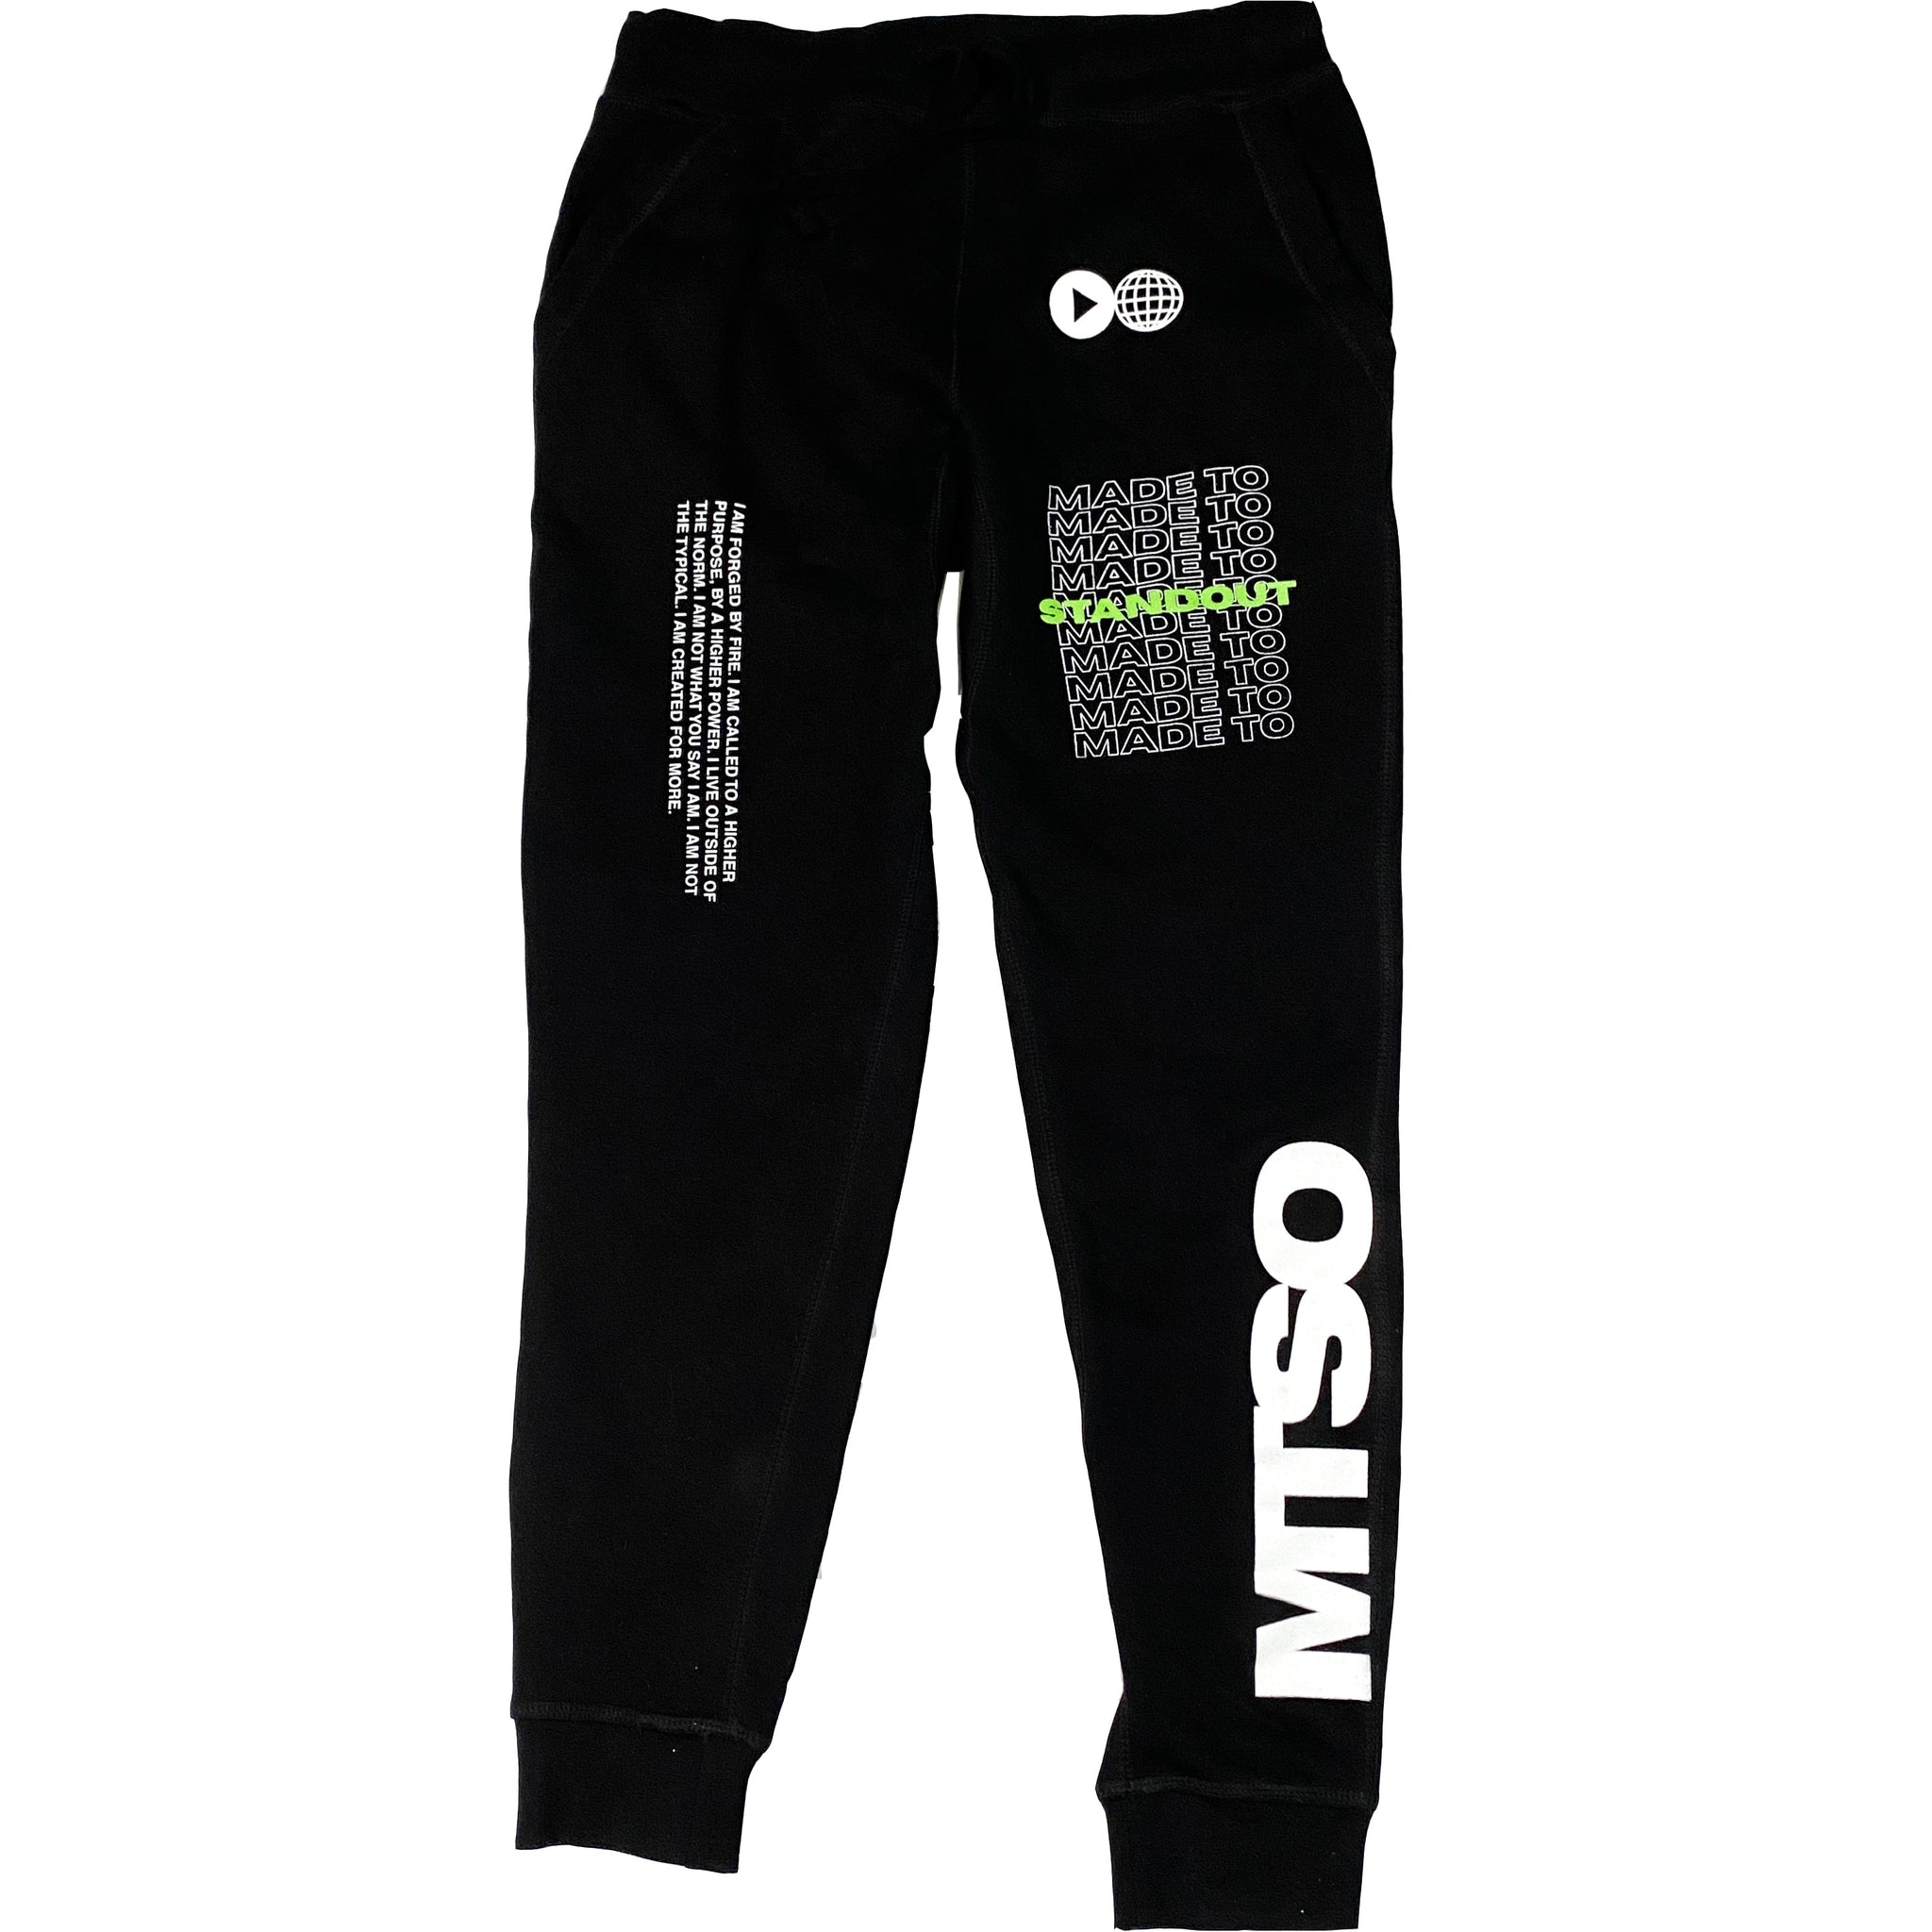 Forged By Fire Sweatpants – Made To Standout